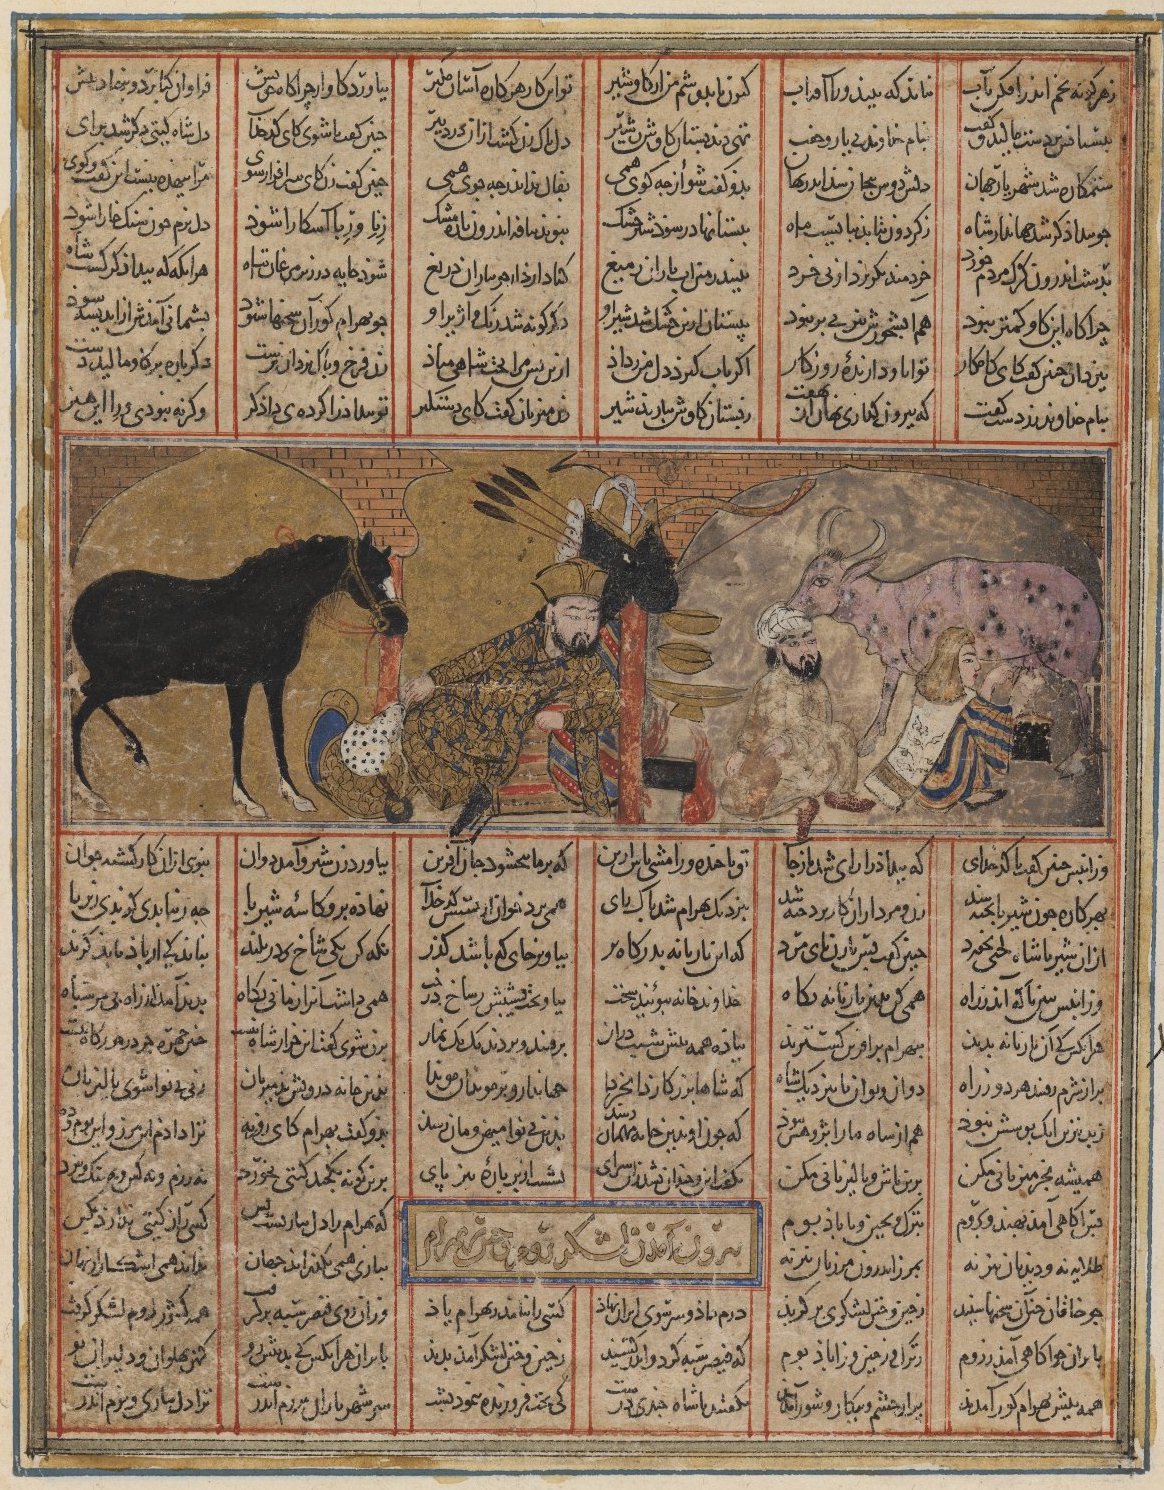 "Bahram Gur in a Peasant's House," folio from the so-called "Second Small Shahnama," early 14th century, ink, opaque watercolors, gold on paper, 16 x 14.5 cm, Iran (Brooklyn Museum of Art)